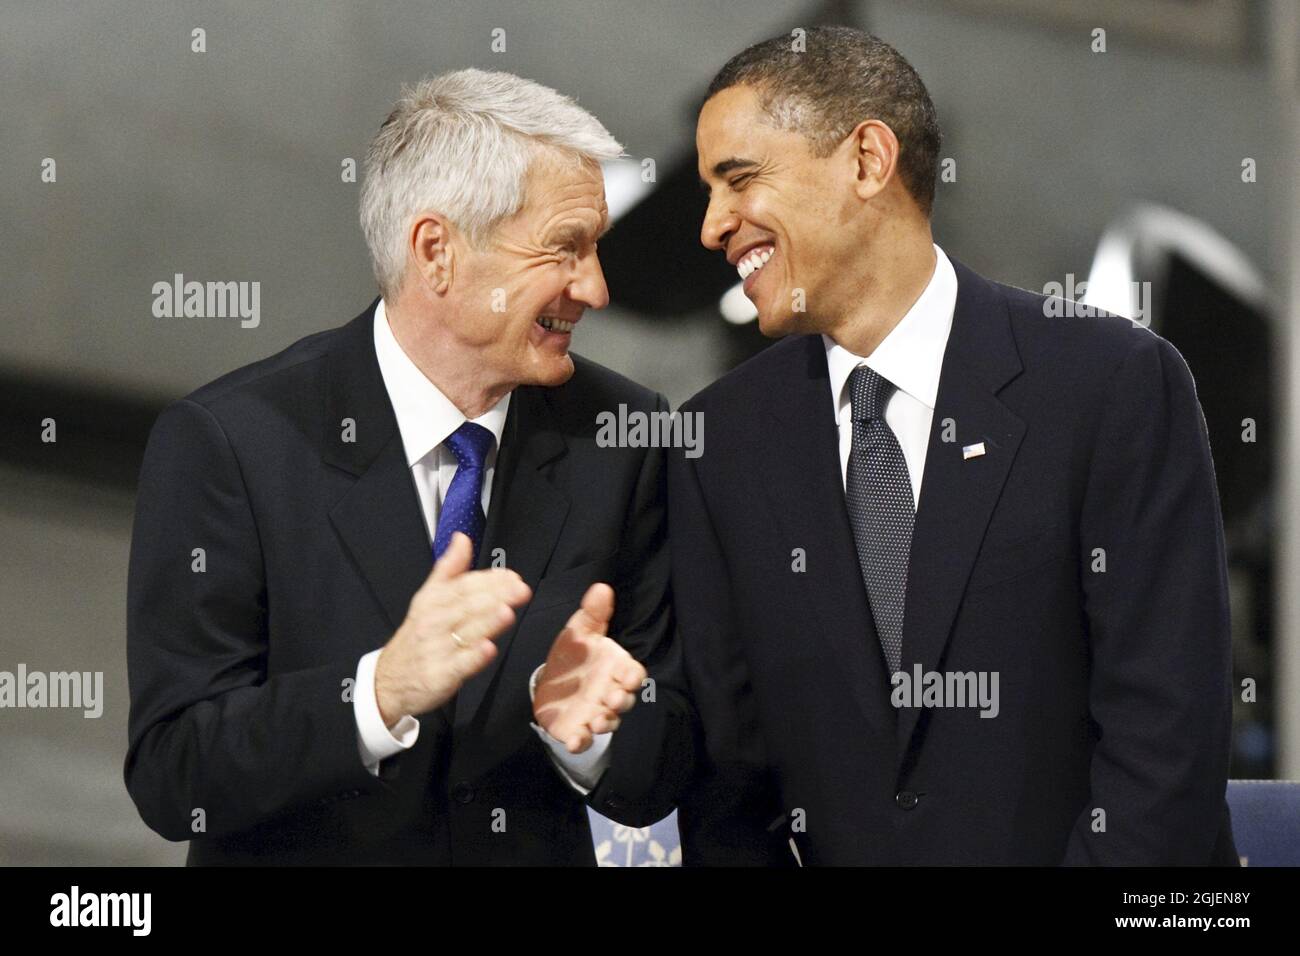 The 2009 Nobel Peace laureate, US President Barack Obama shares a smile with Nobel committee chairman Thorbjorn Jagland during the Nobel award ceremony in the City Hall of Oslo, Norway, December 10, 2009. Stock Photo